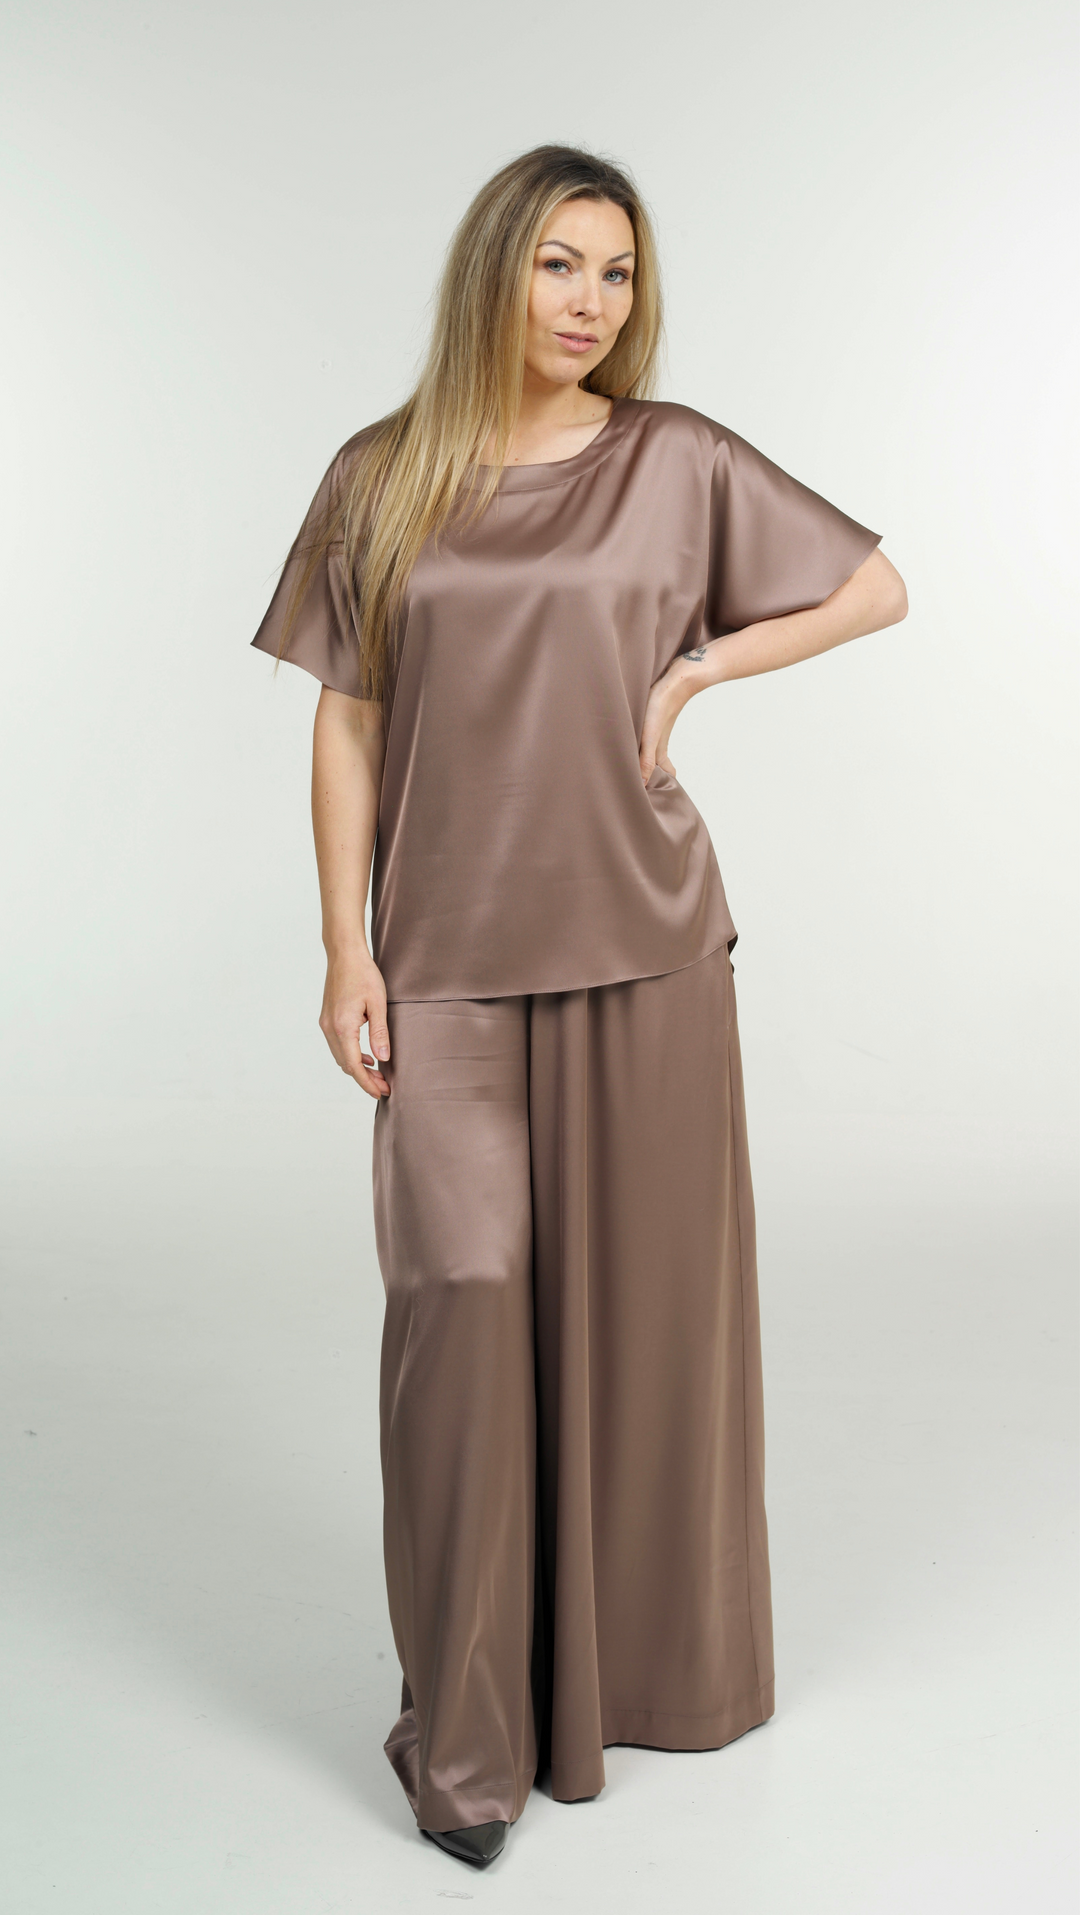 Chocolate silk top BeaA - Be At Home with Yourself